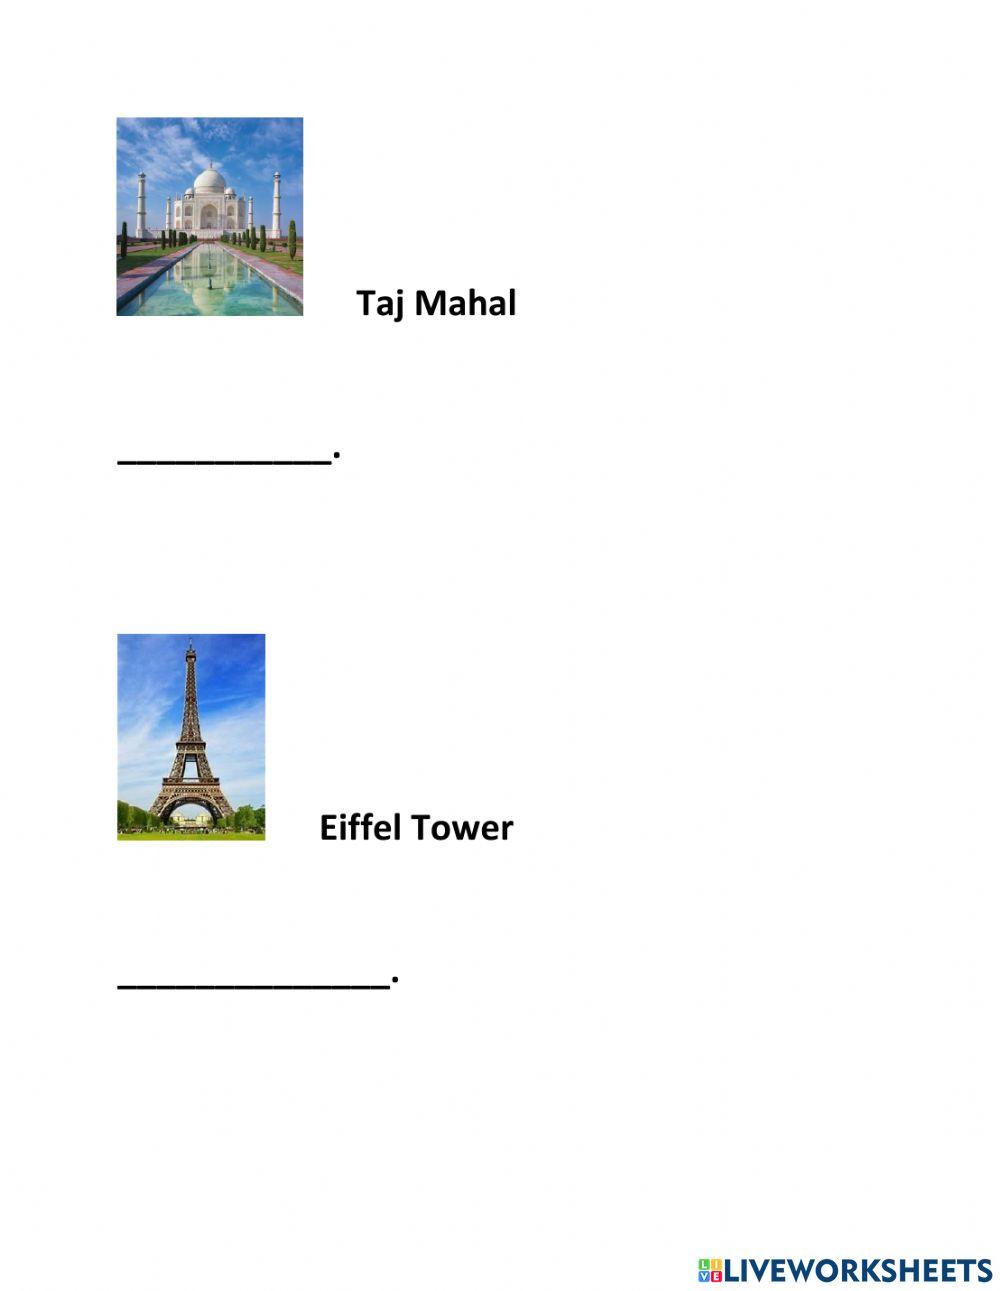 Famous Monuments of the world